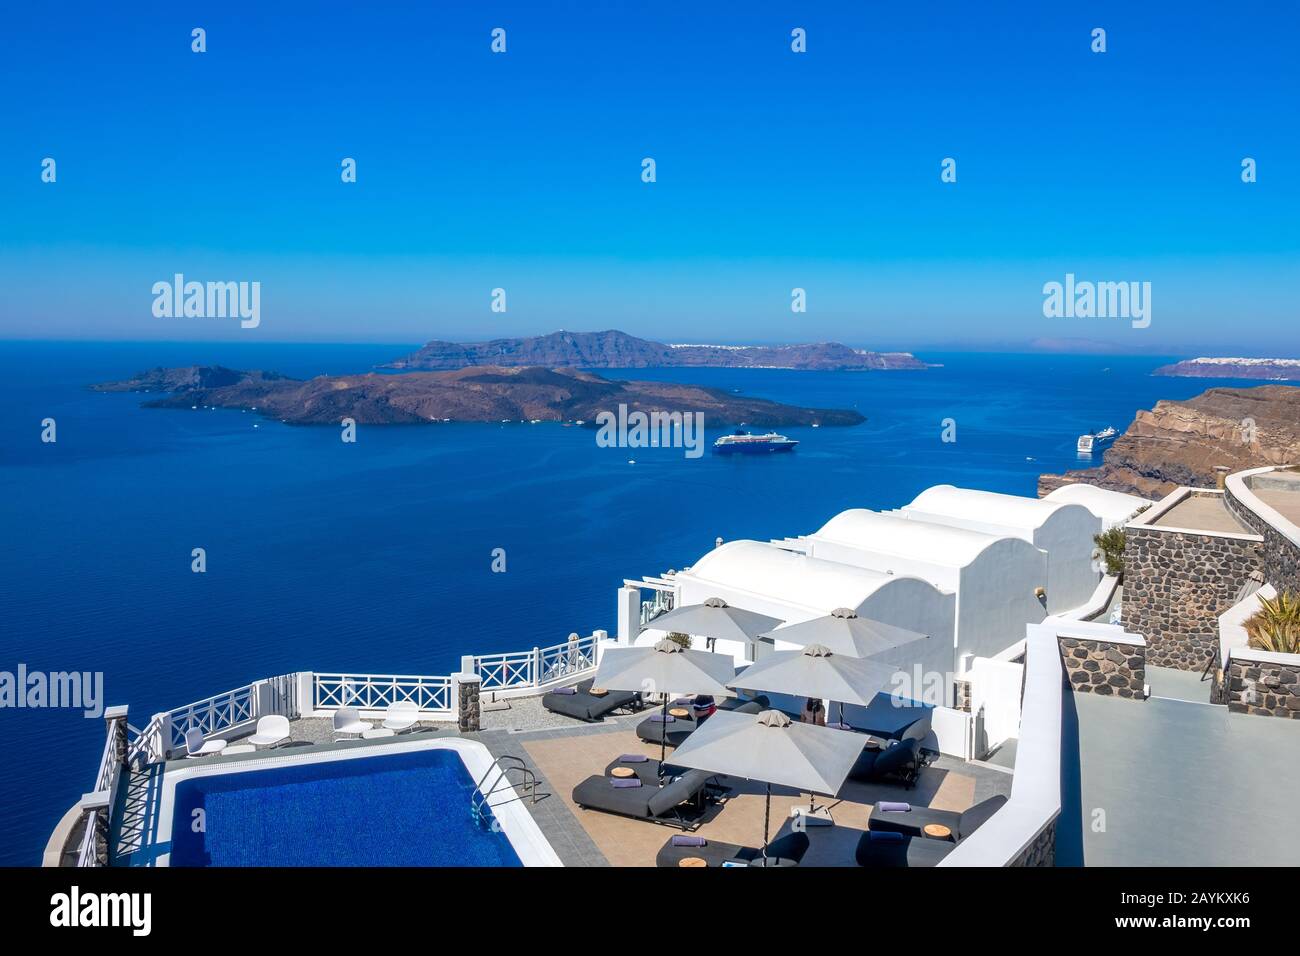 Greece. Santorini. Thira island. Hotel on the high bank in Oia. Pool and sun loungers for relaxation in sunny weather. Seascape Stock Photo